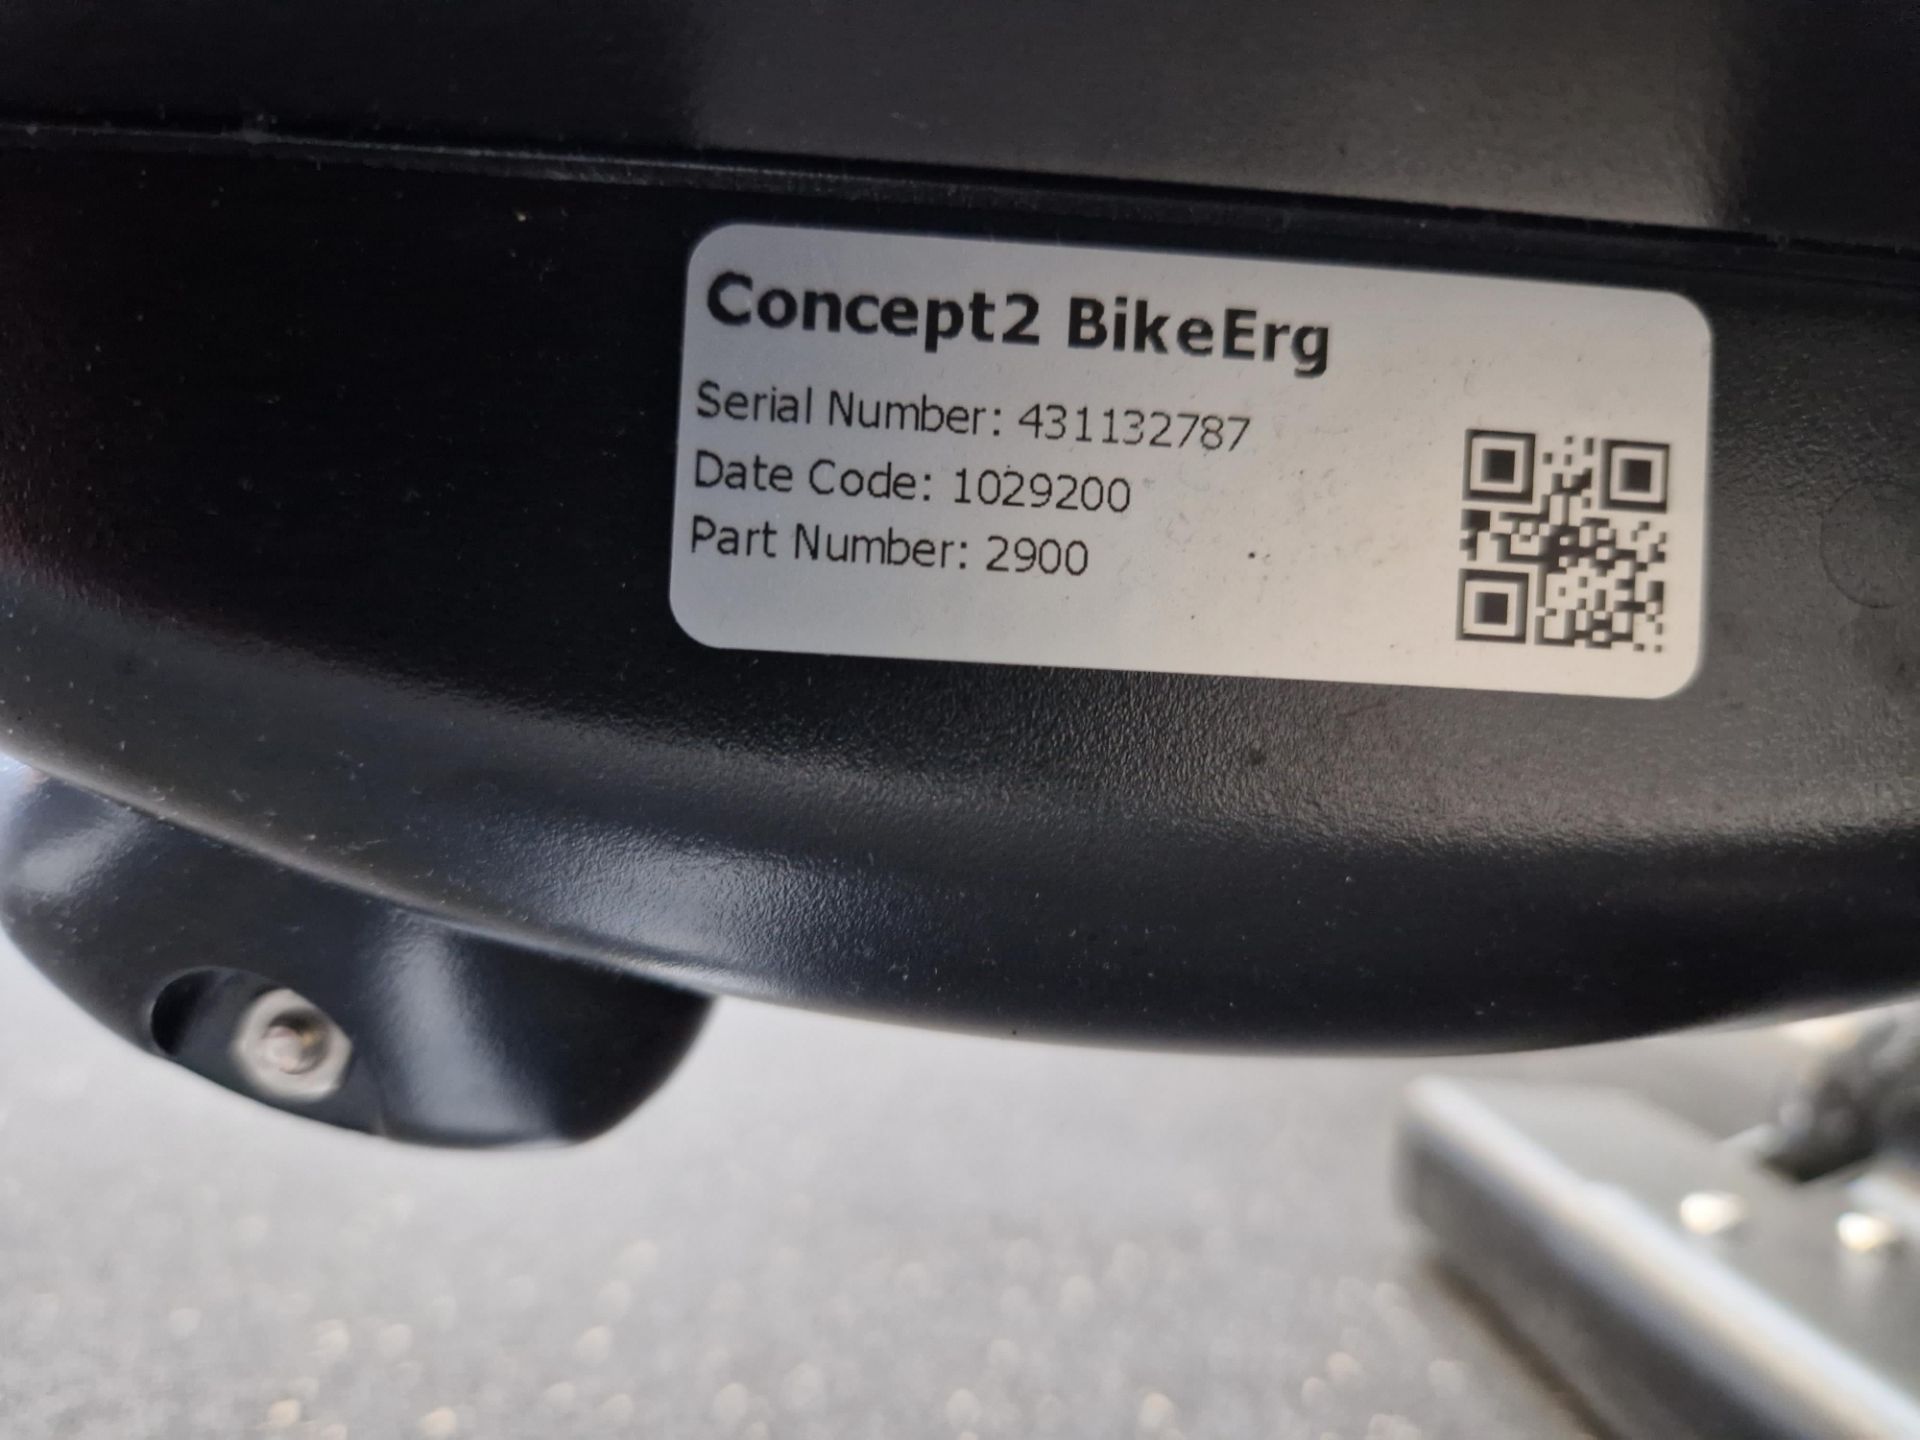 Concept 2 Model PM5 BikeErg, Serial No. 431132787, Date Code 1029200 Please read the following - Image 4 of 4